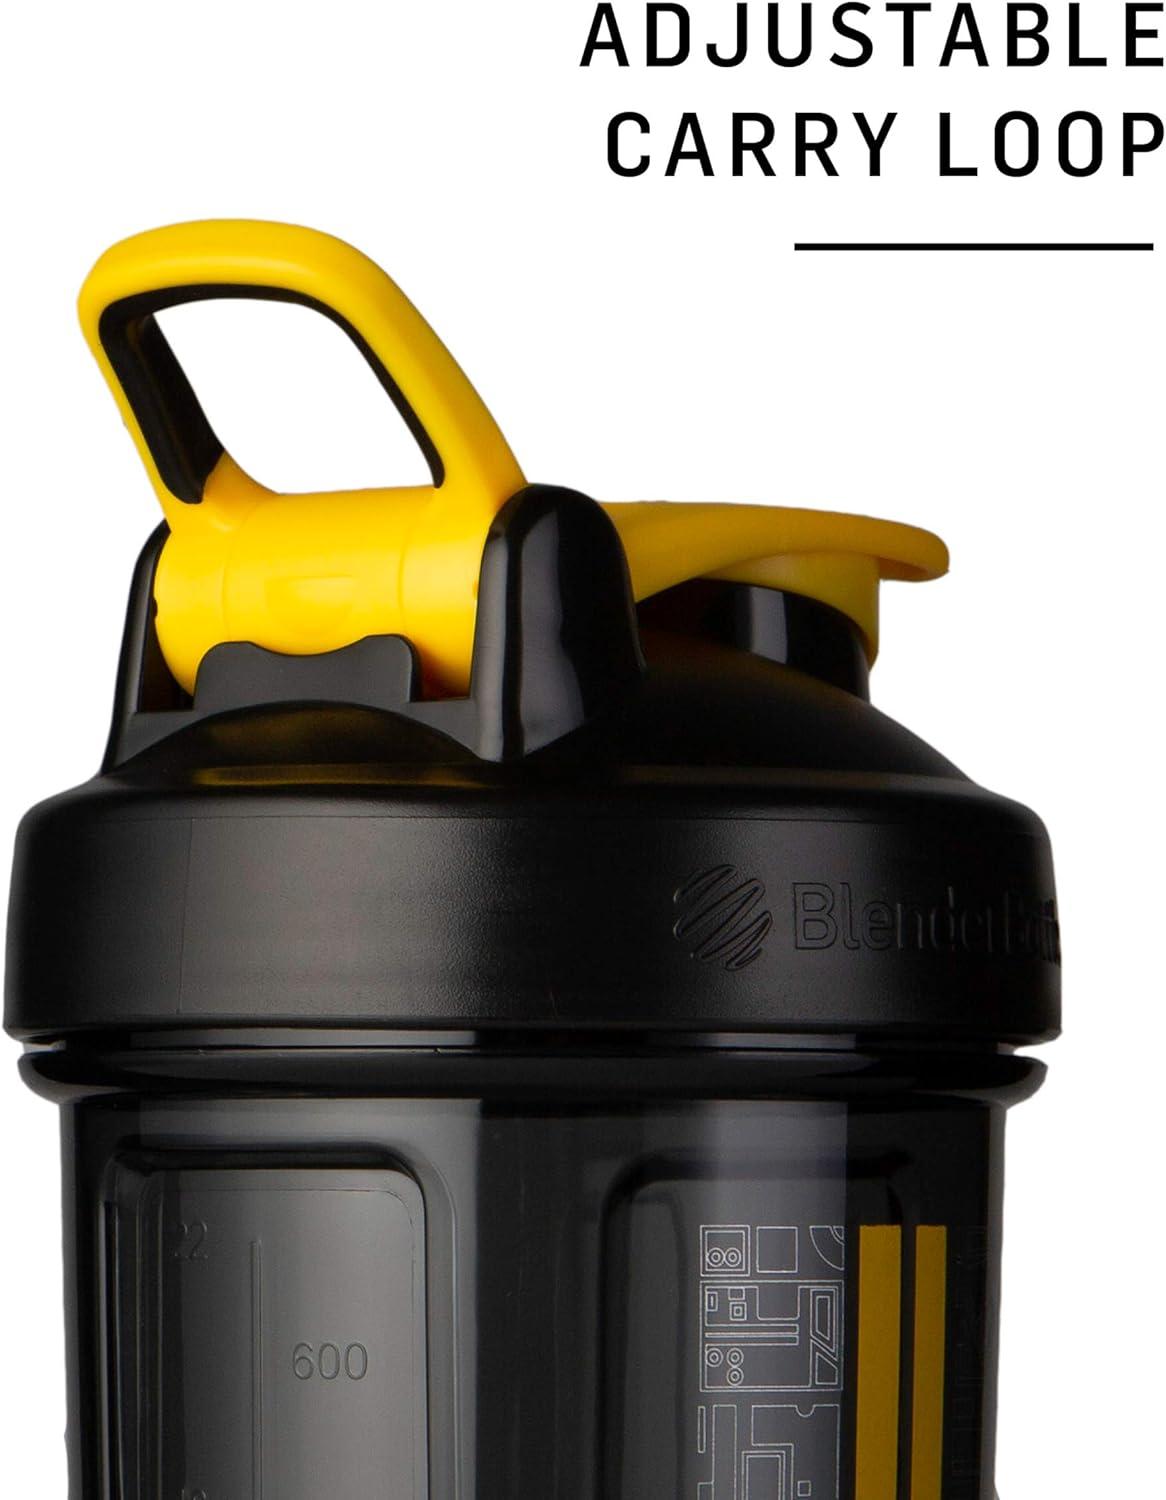 Star Wars Shaker Cups and Protein Bottles